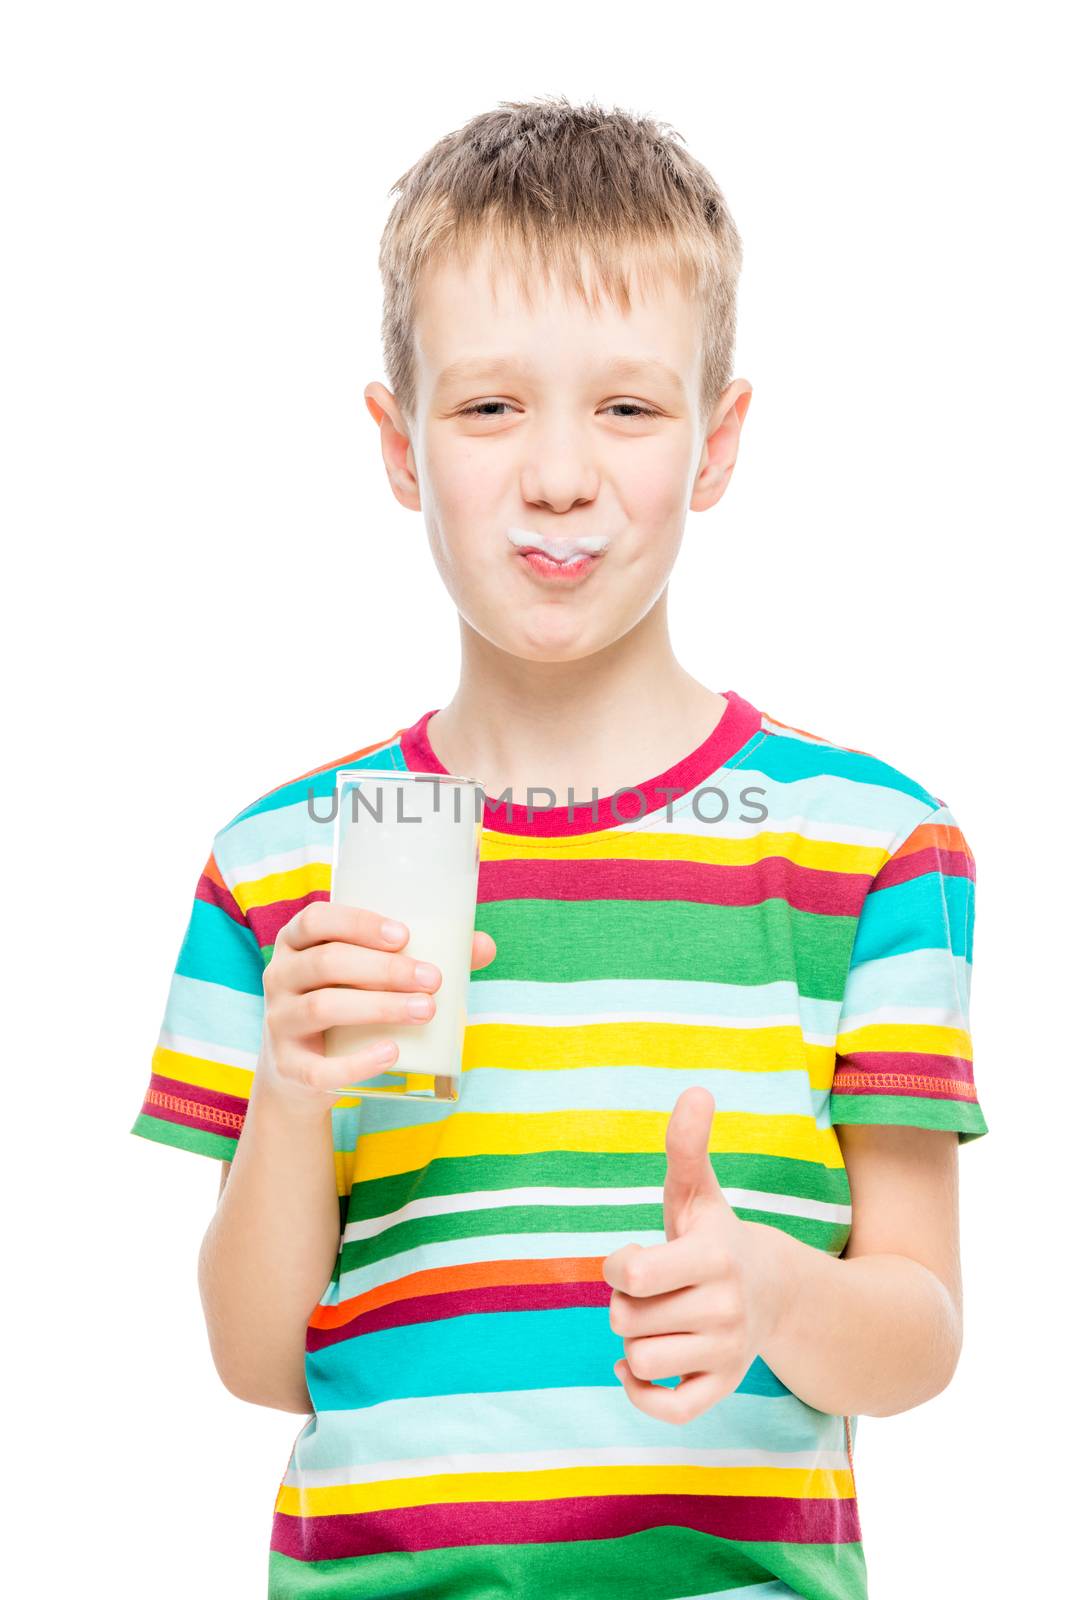 healthy boy and healthy tasty milk drink, portrait isolated